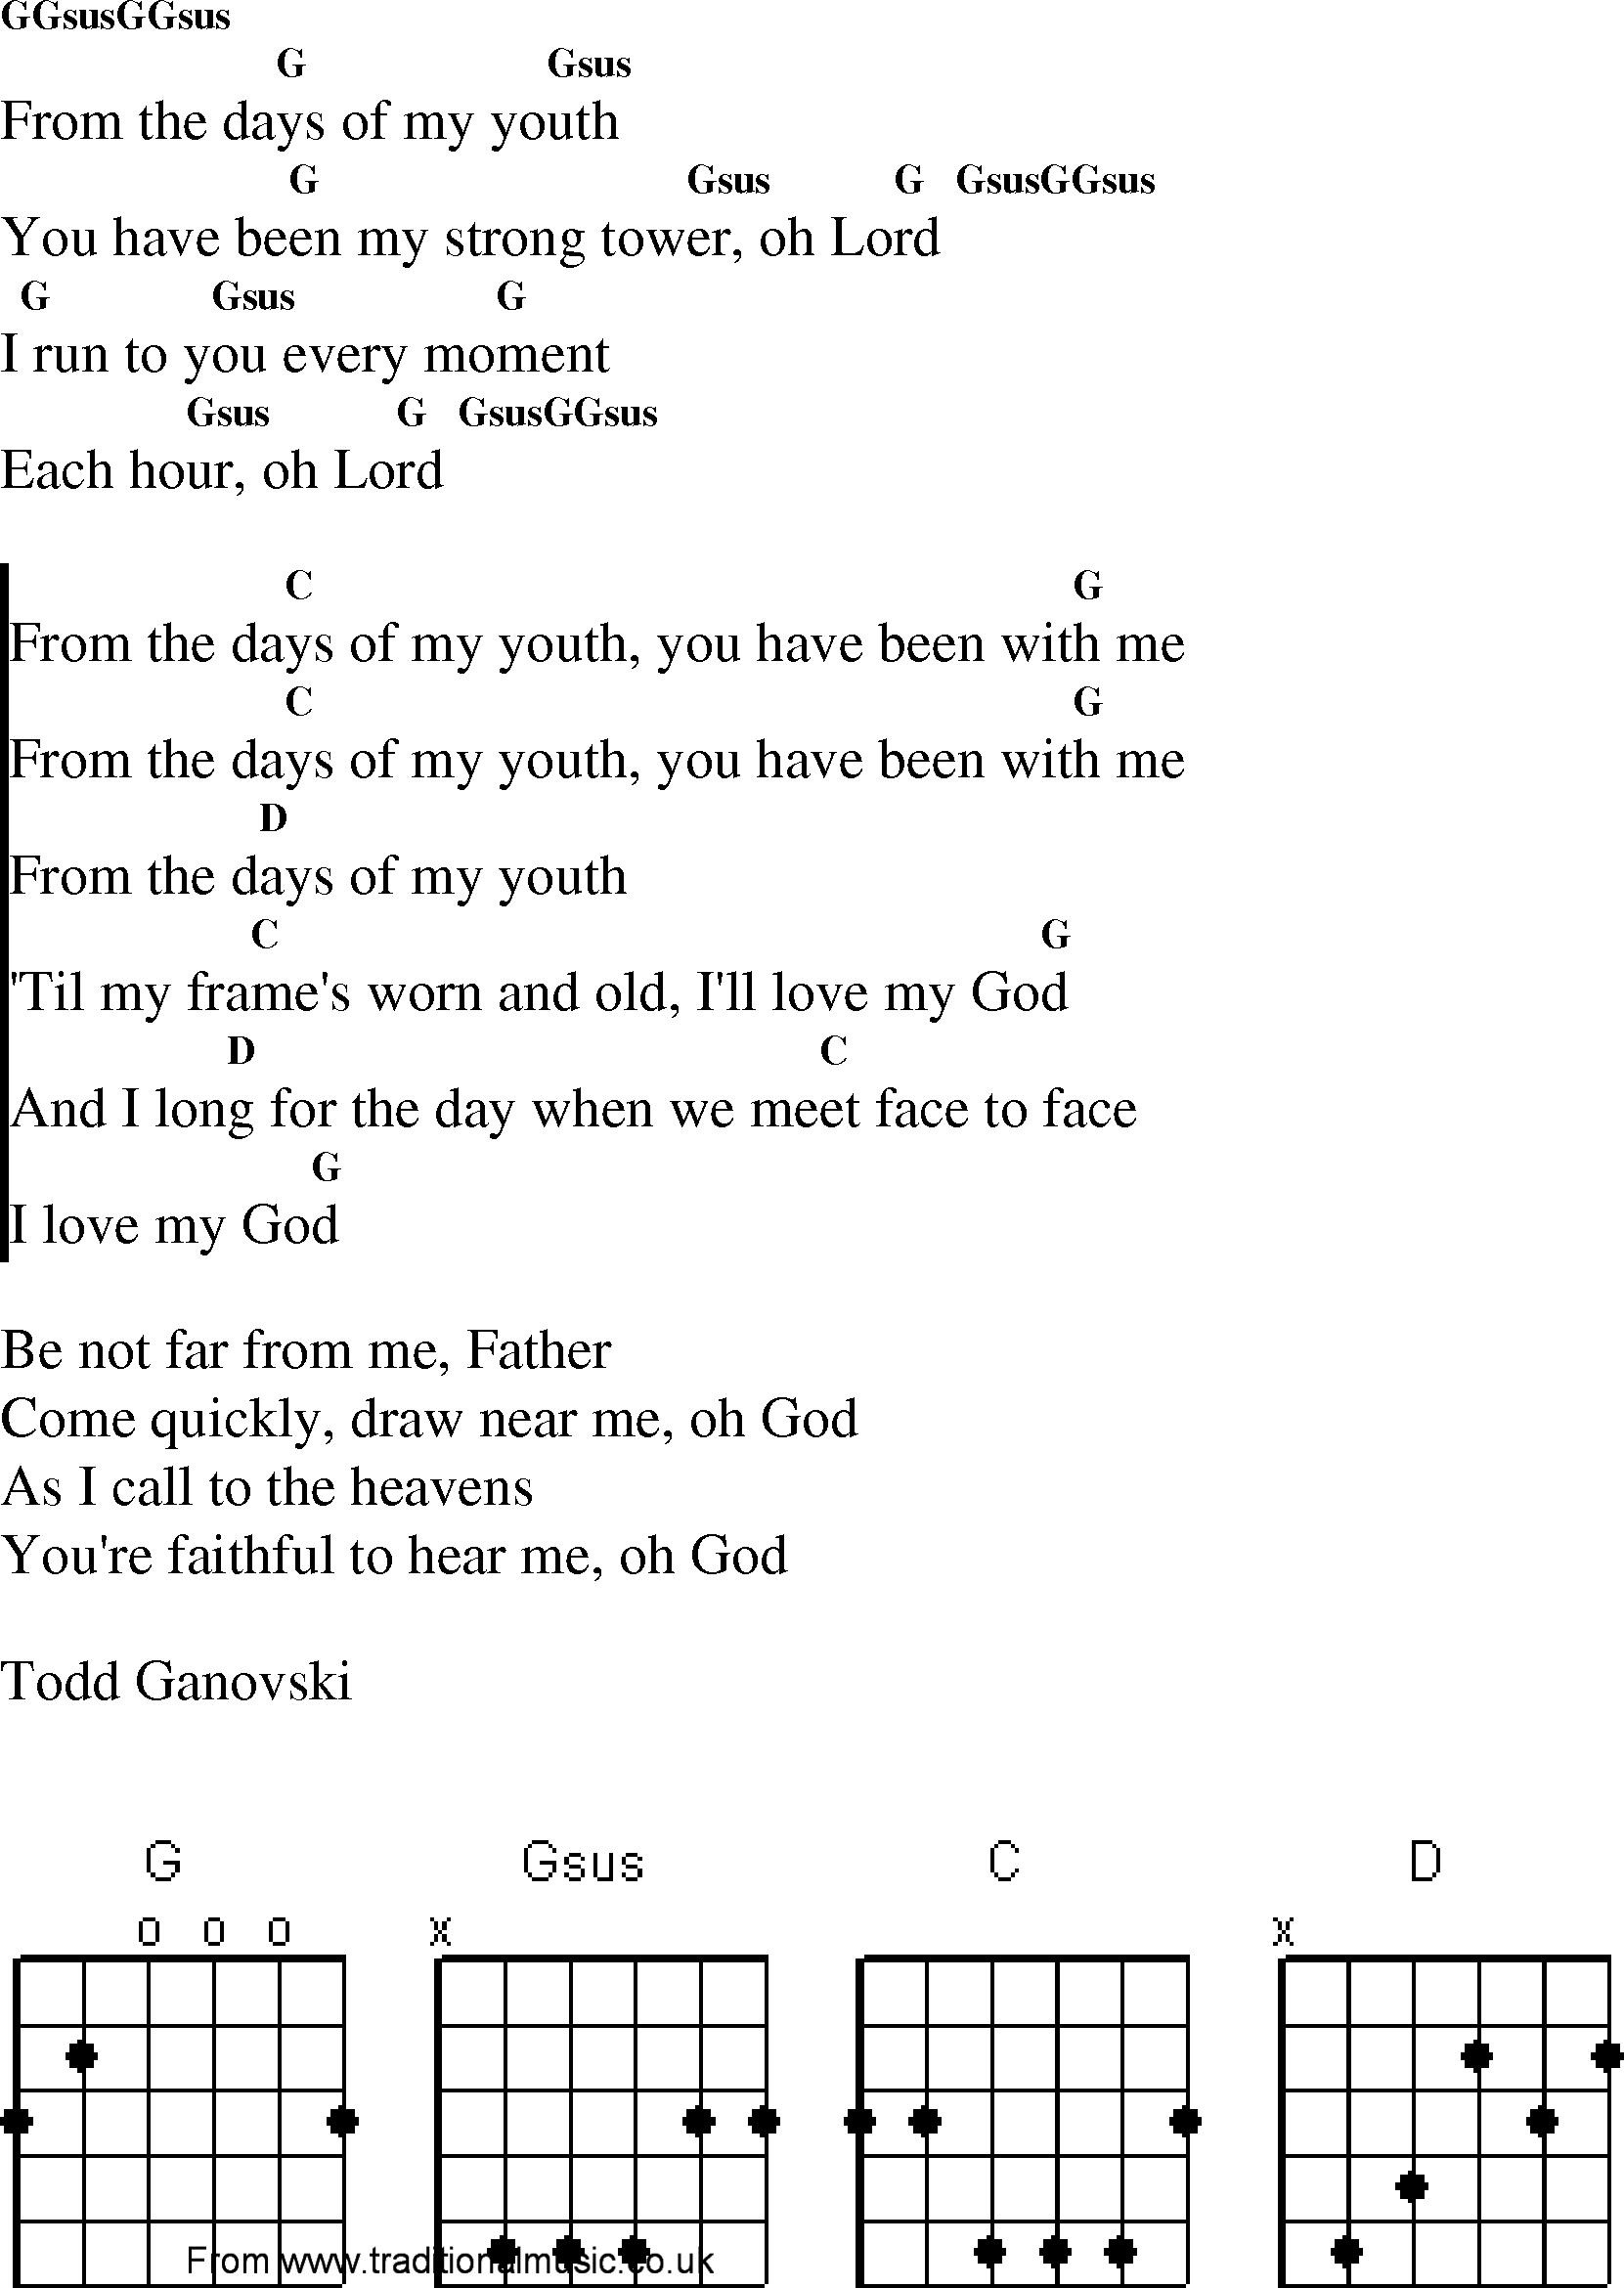 Gospel Song: days_of_my_youth, lyrics and chords.